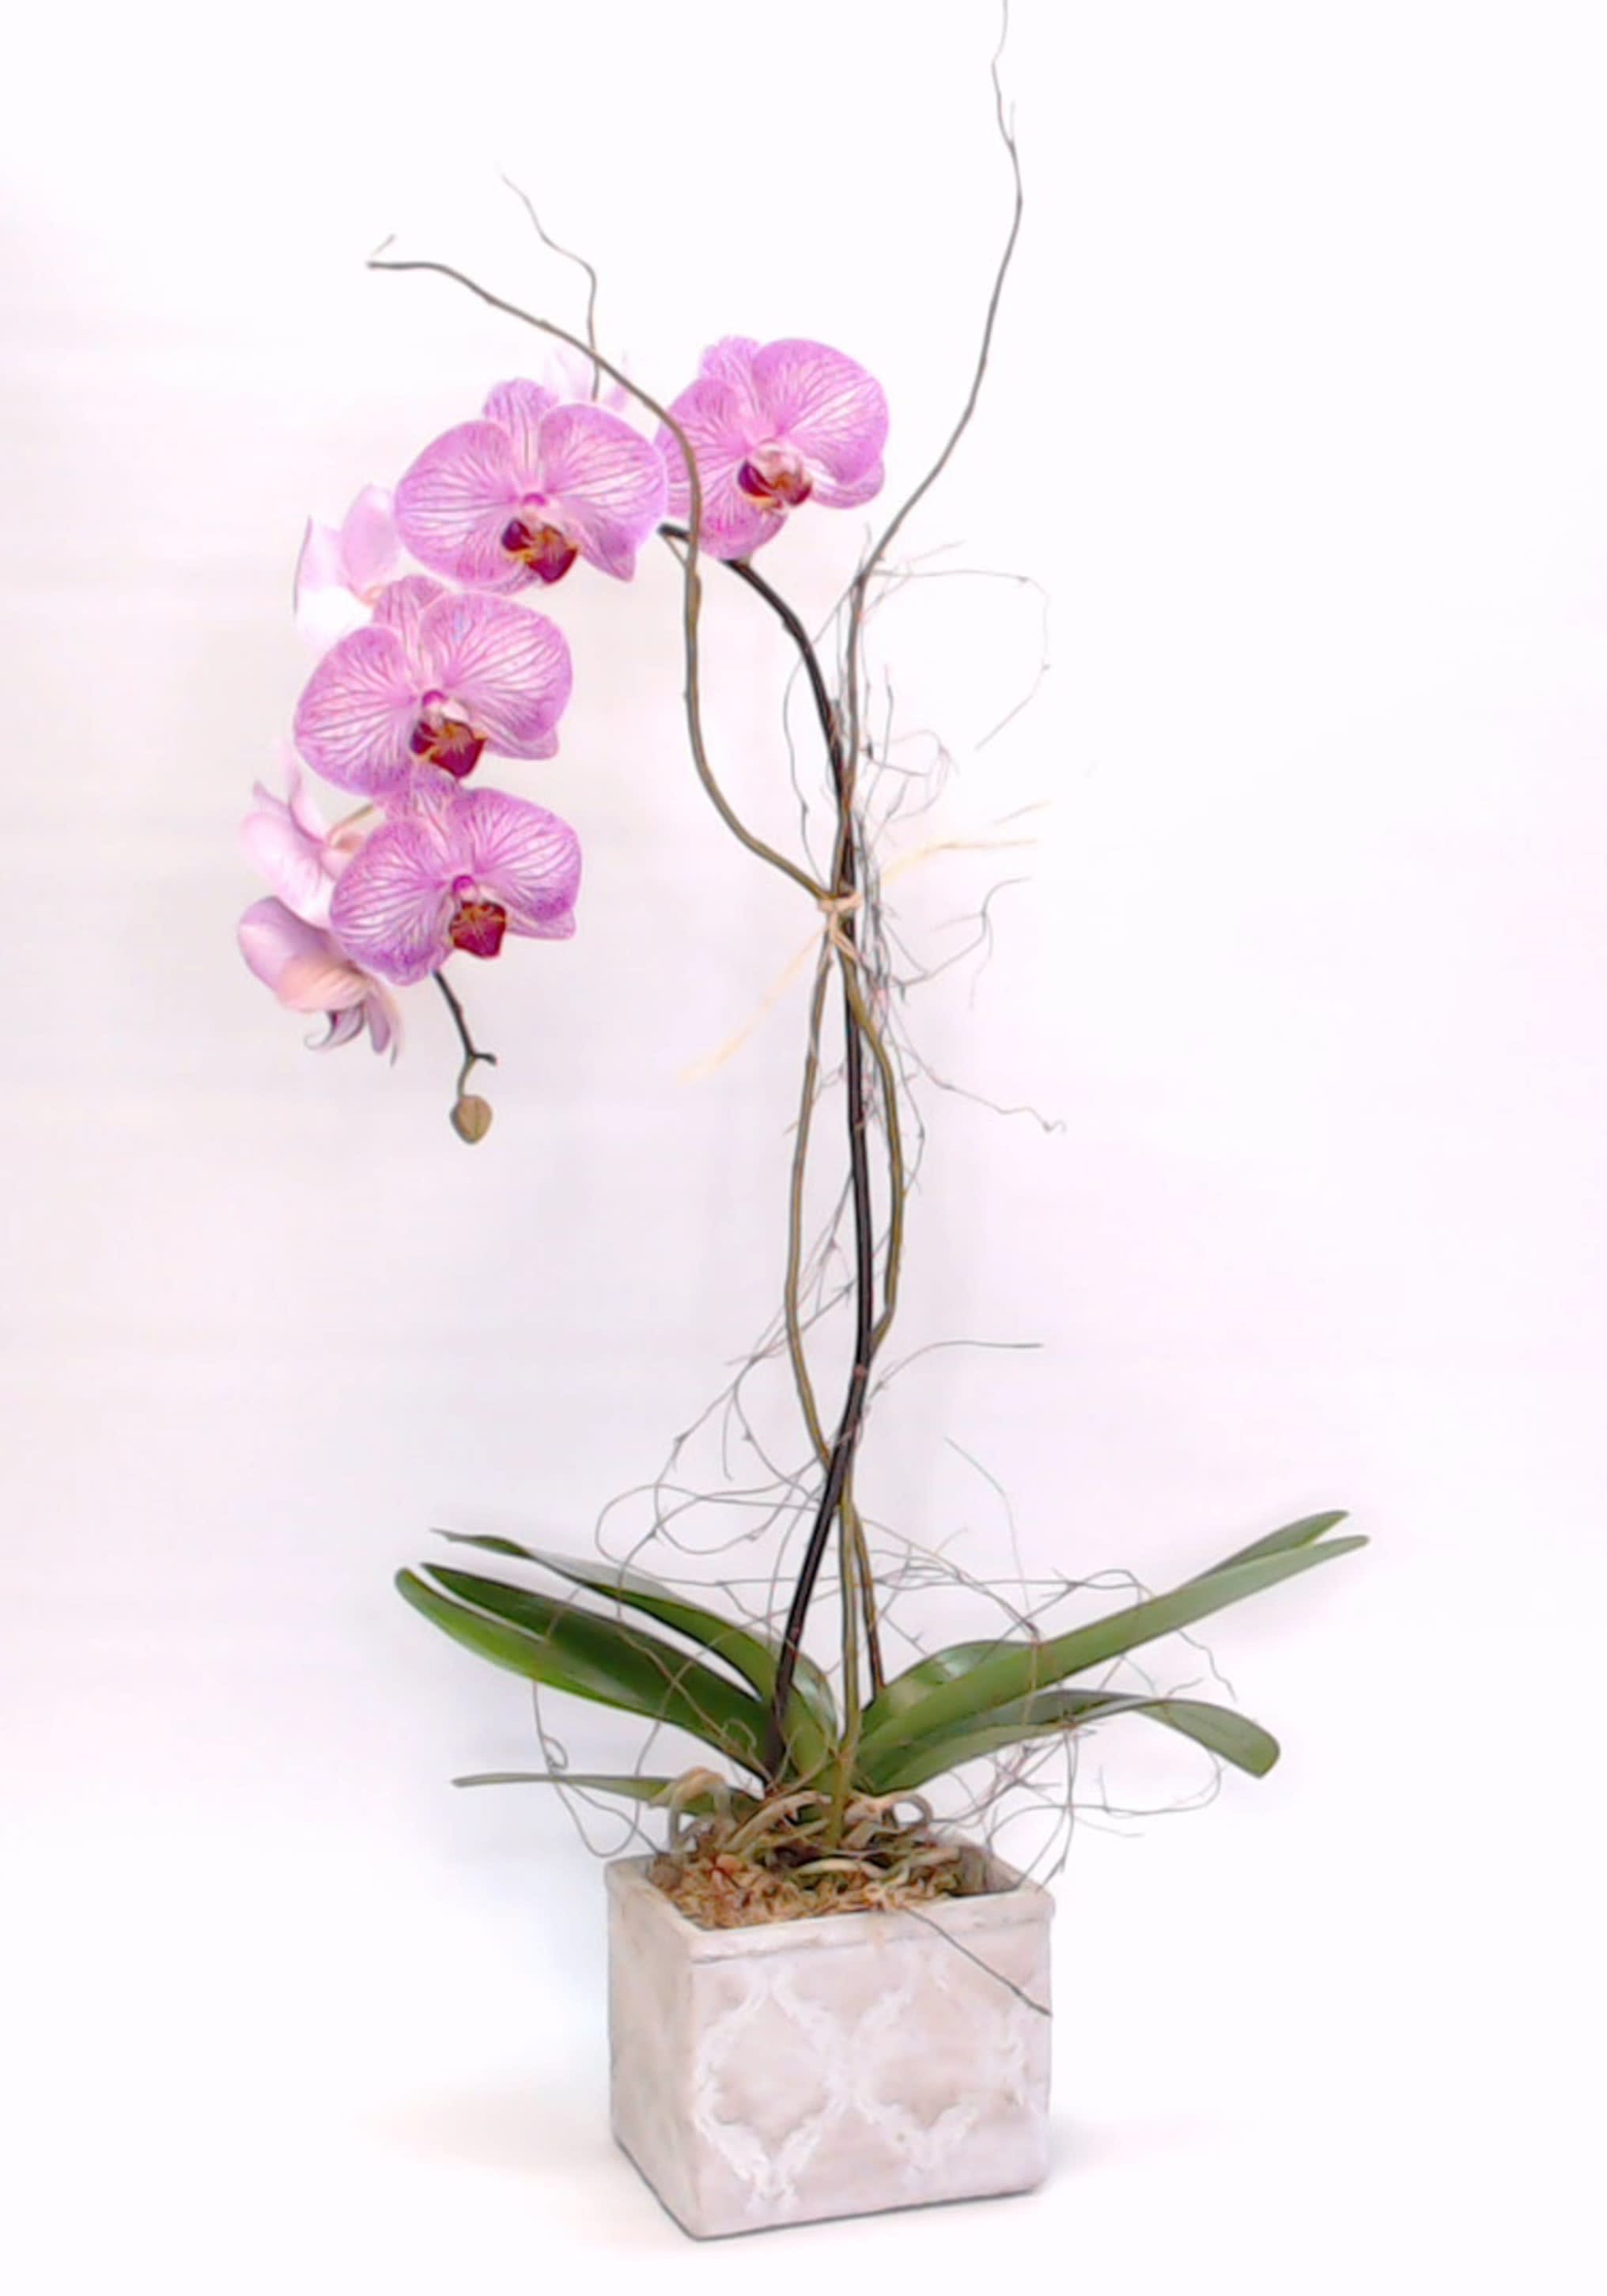 Phalenopsis Orchid  - Simple elegant orchid in a decorative ceramic vessel. (Vessels and orchid patterns vary)